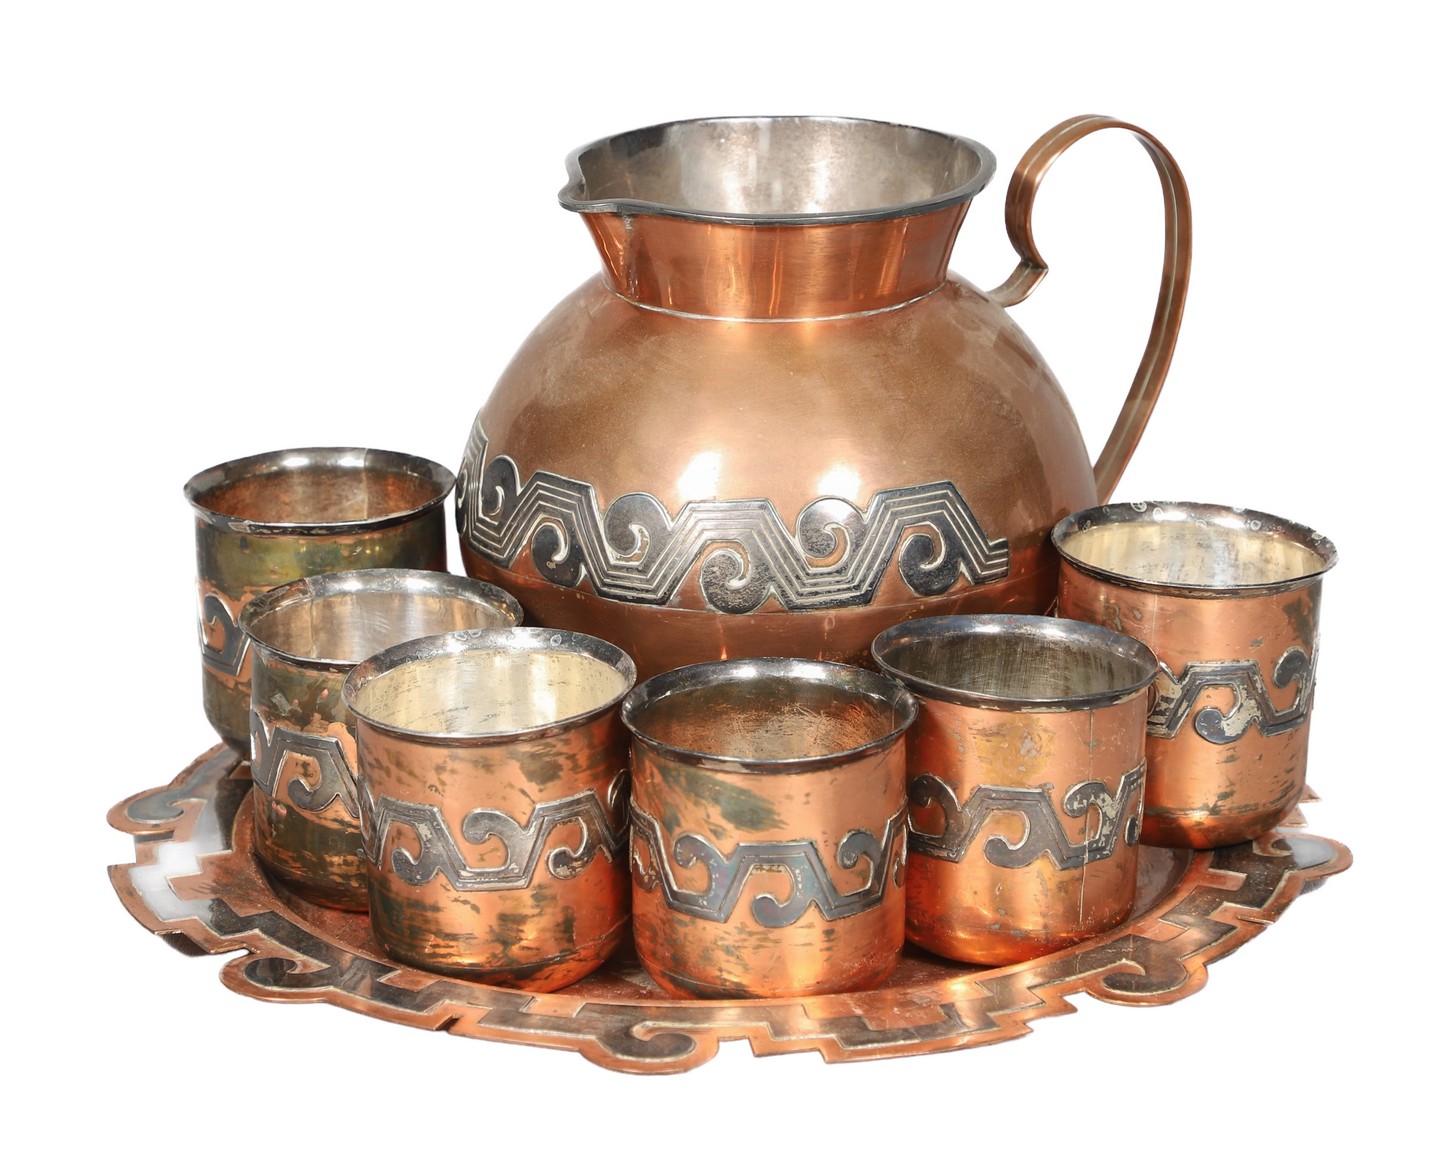 Mixed metal drink set, copper and